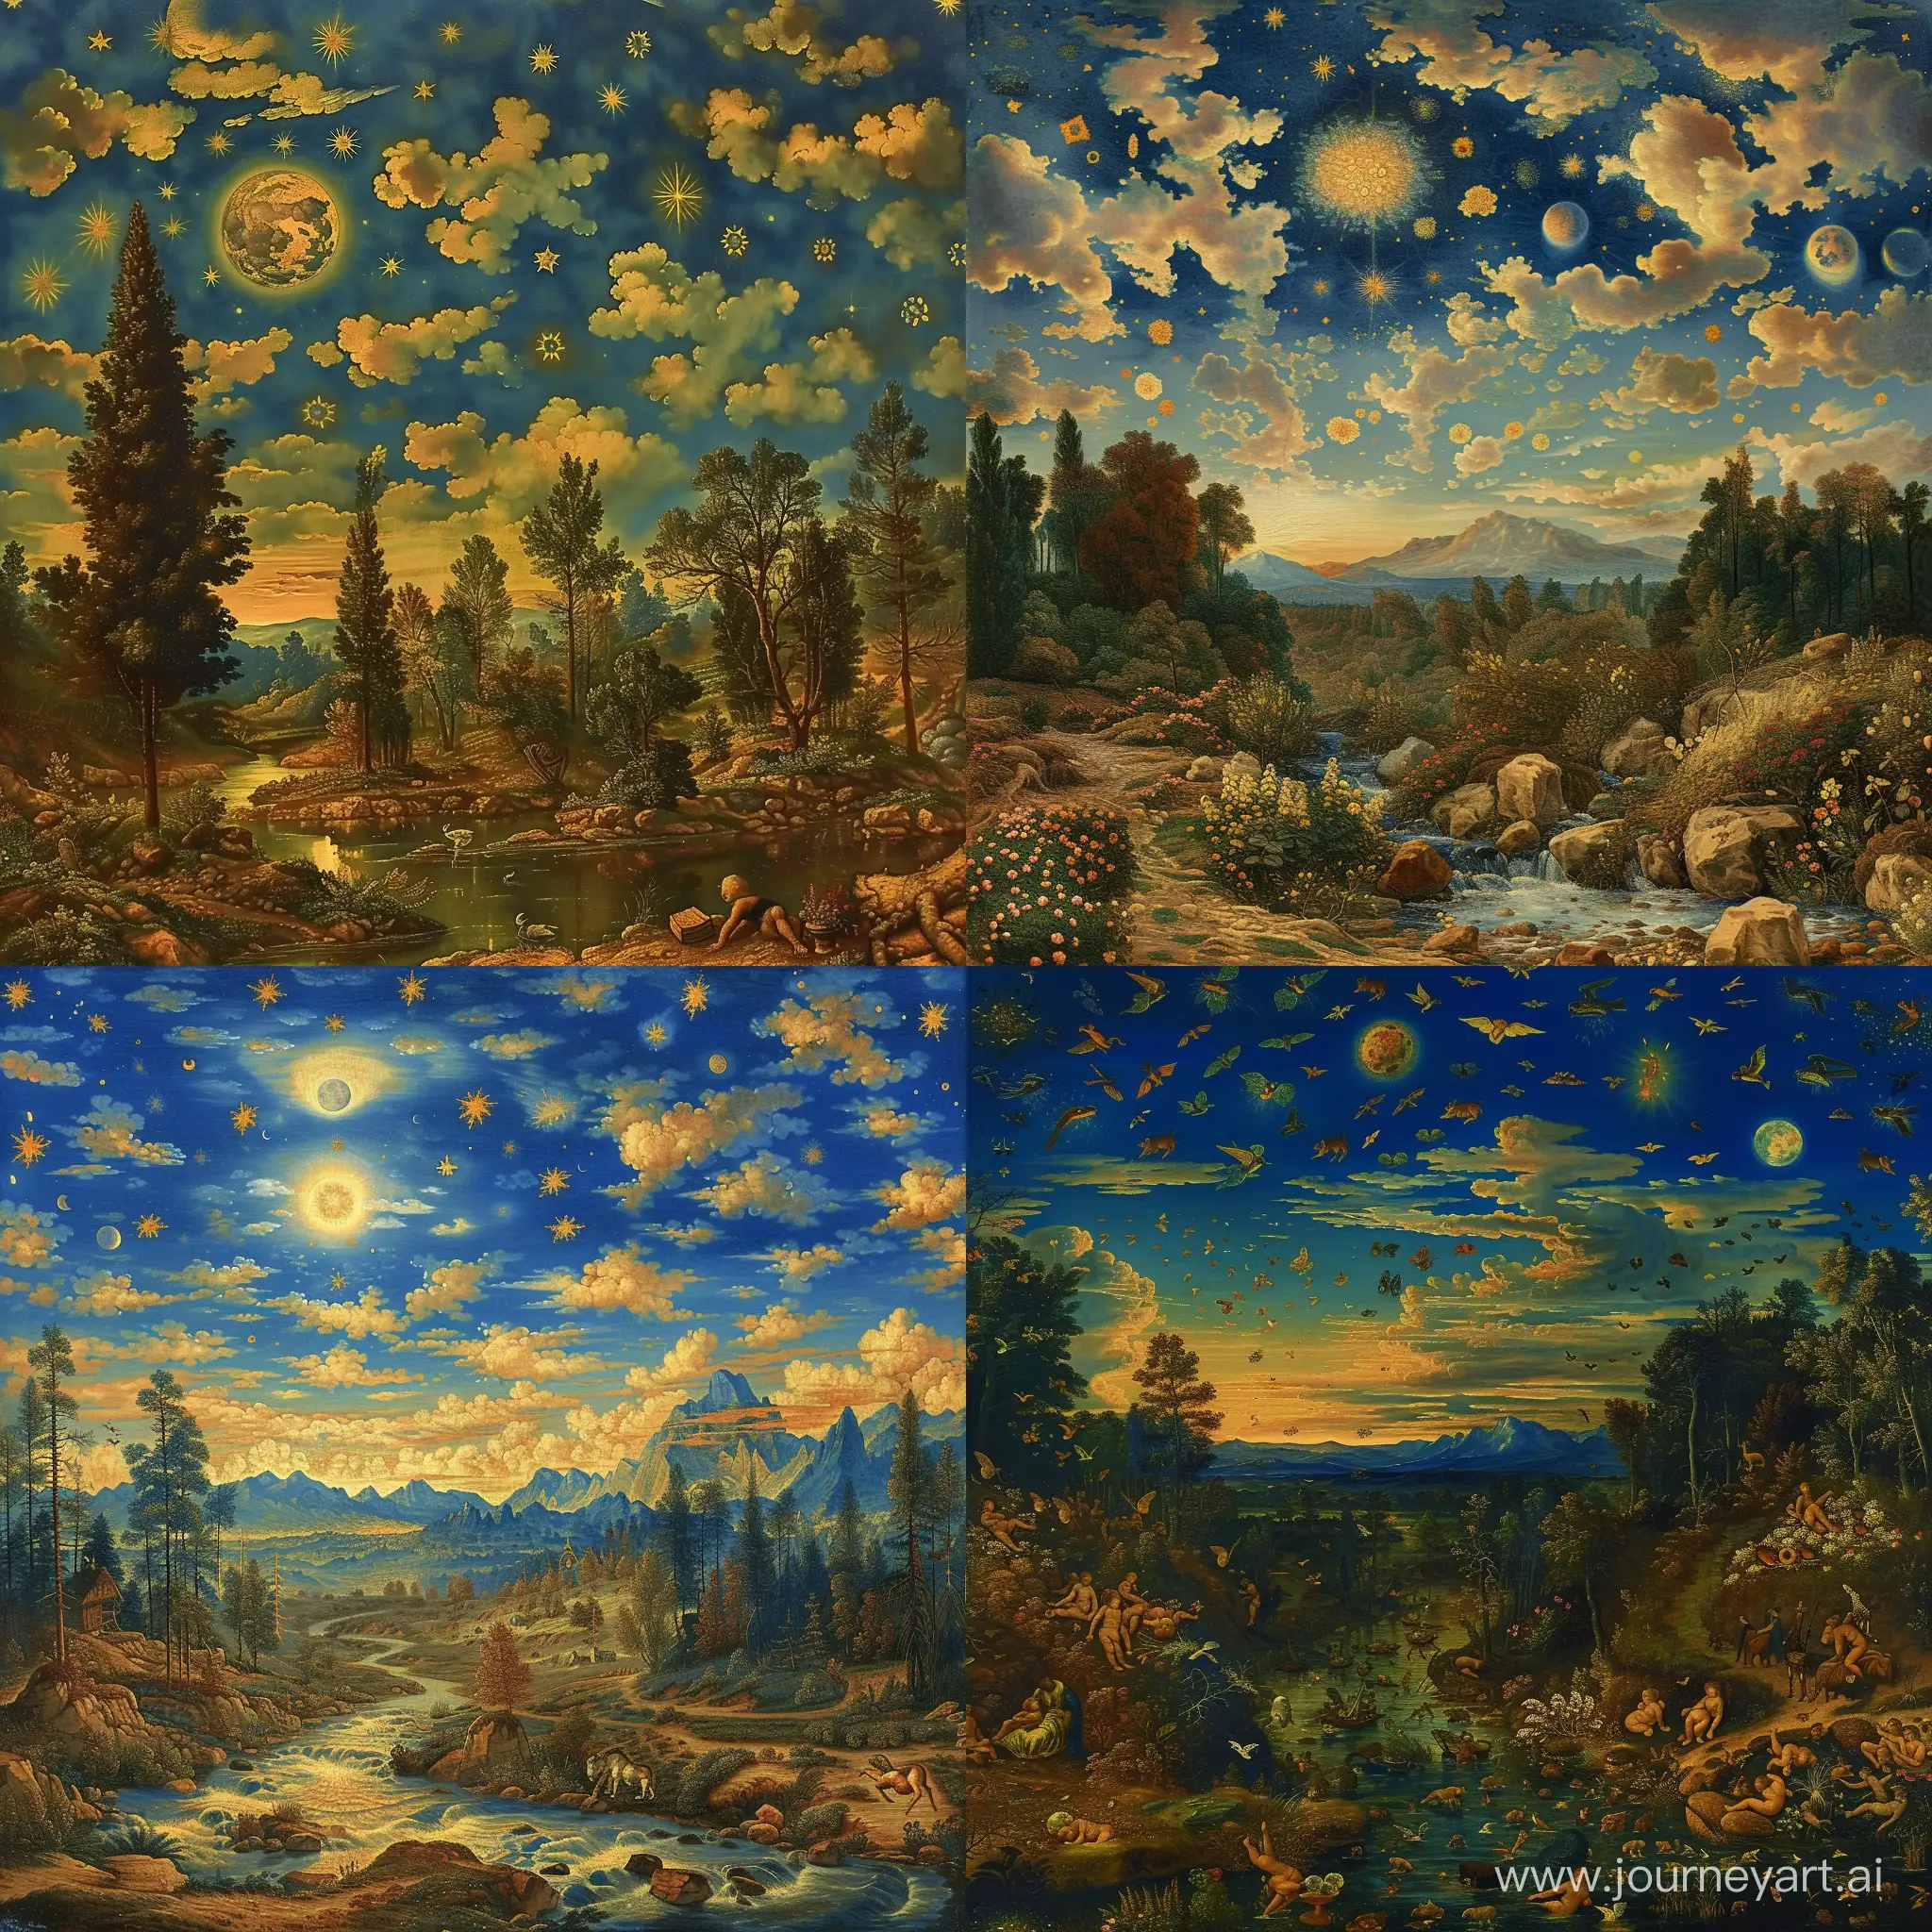 Vibrant-Landscape-Painting-with-Van-Goghesque-Style